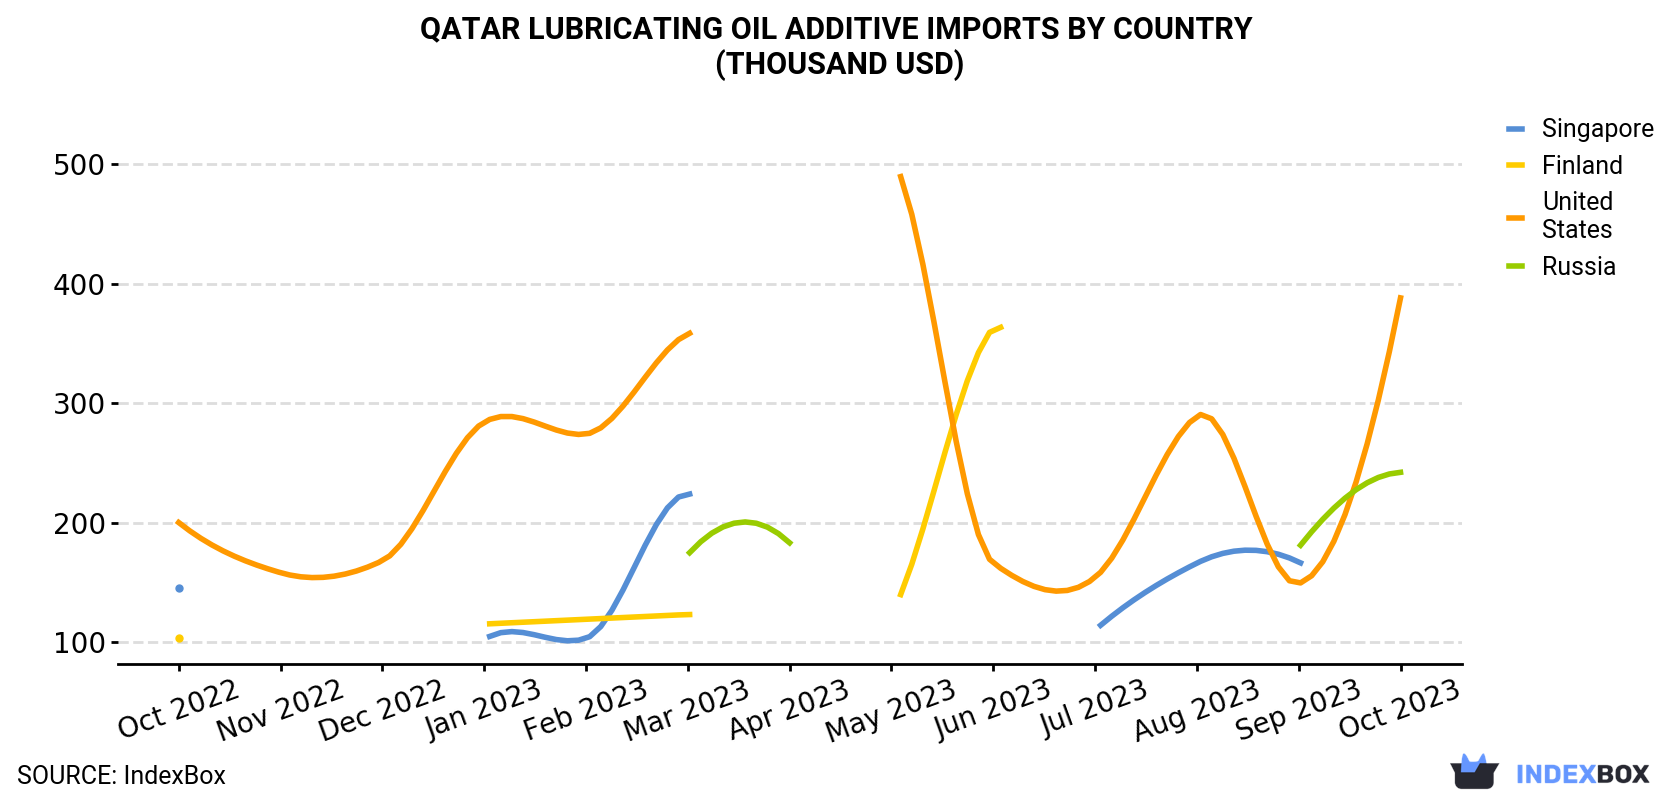 Qatar Lubricating Oil Additive Imports By Country (Thousand USD)